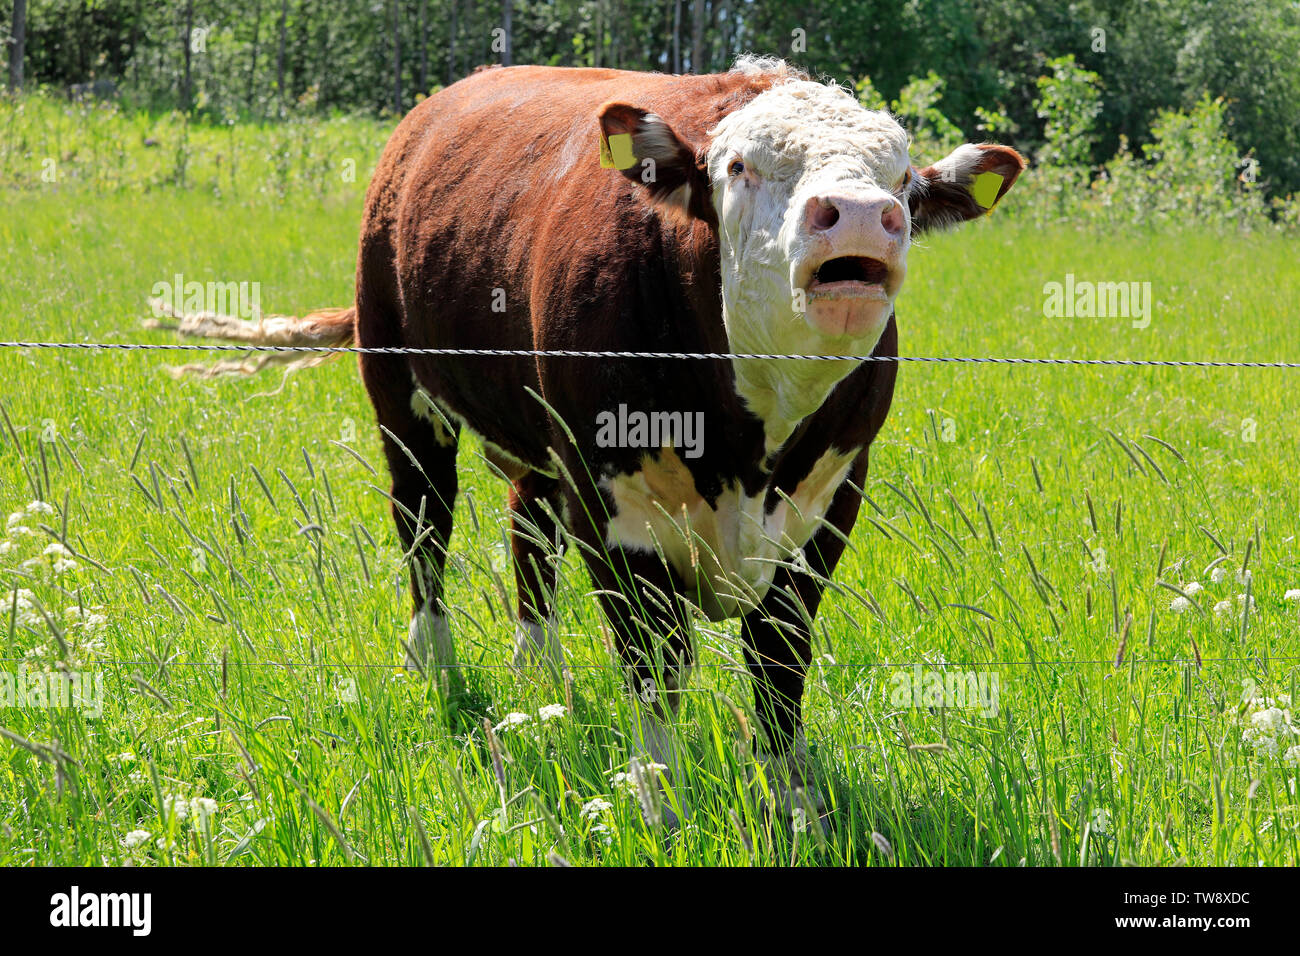 Upset and angry Hereford bull bellowing in his pen on a sunny day of summer. Stock Photo